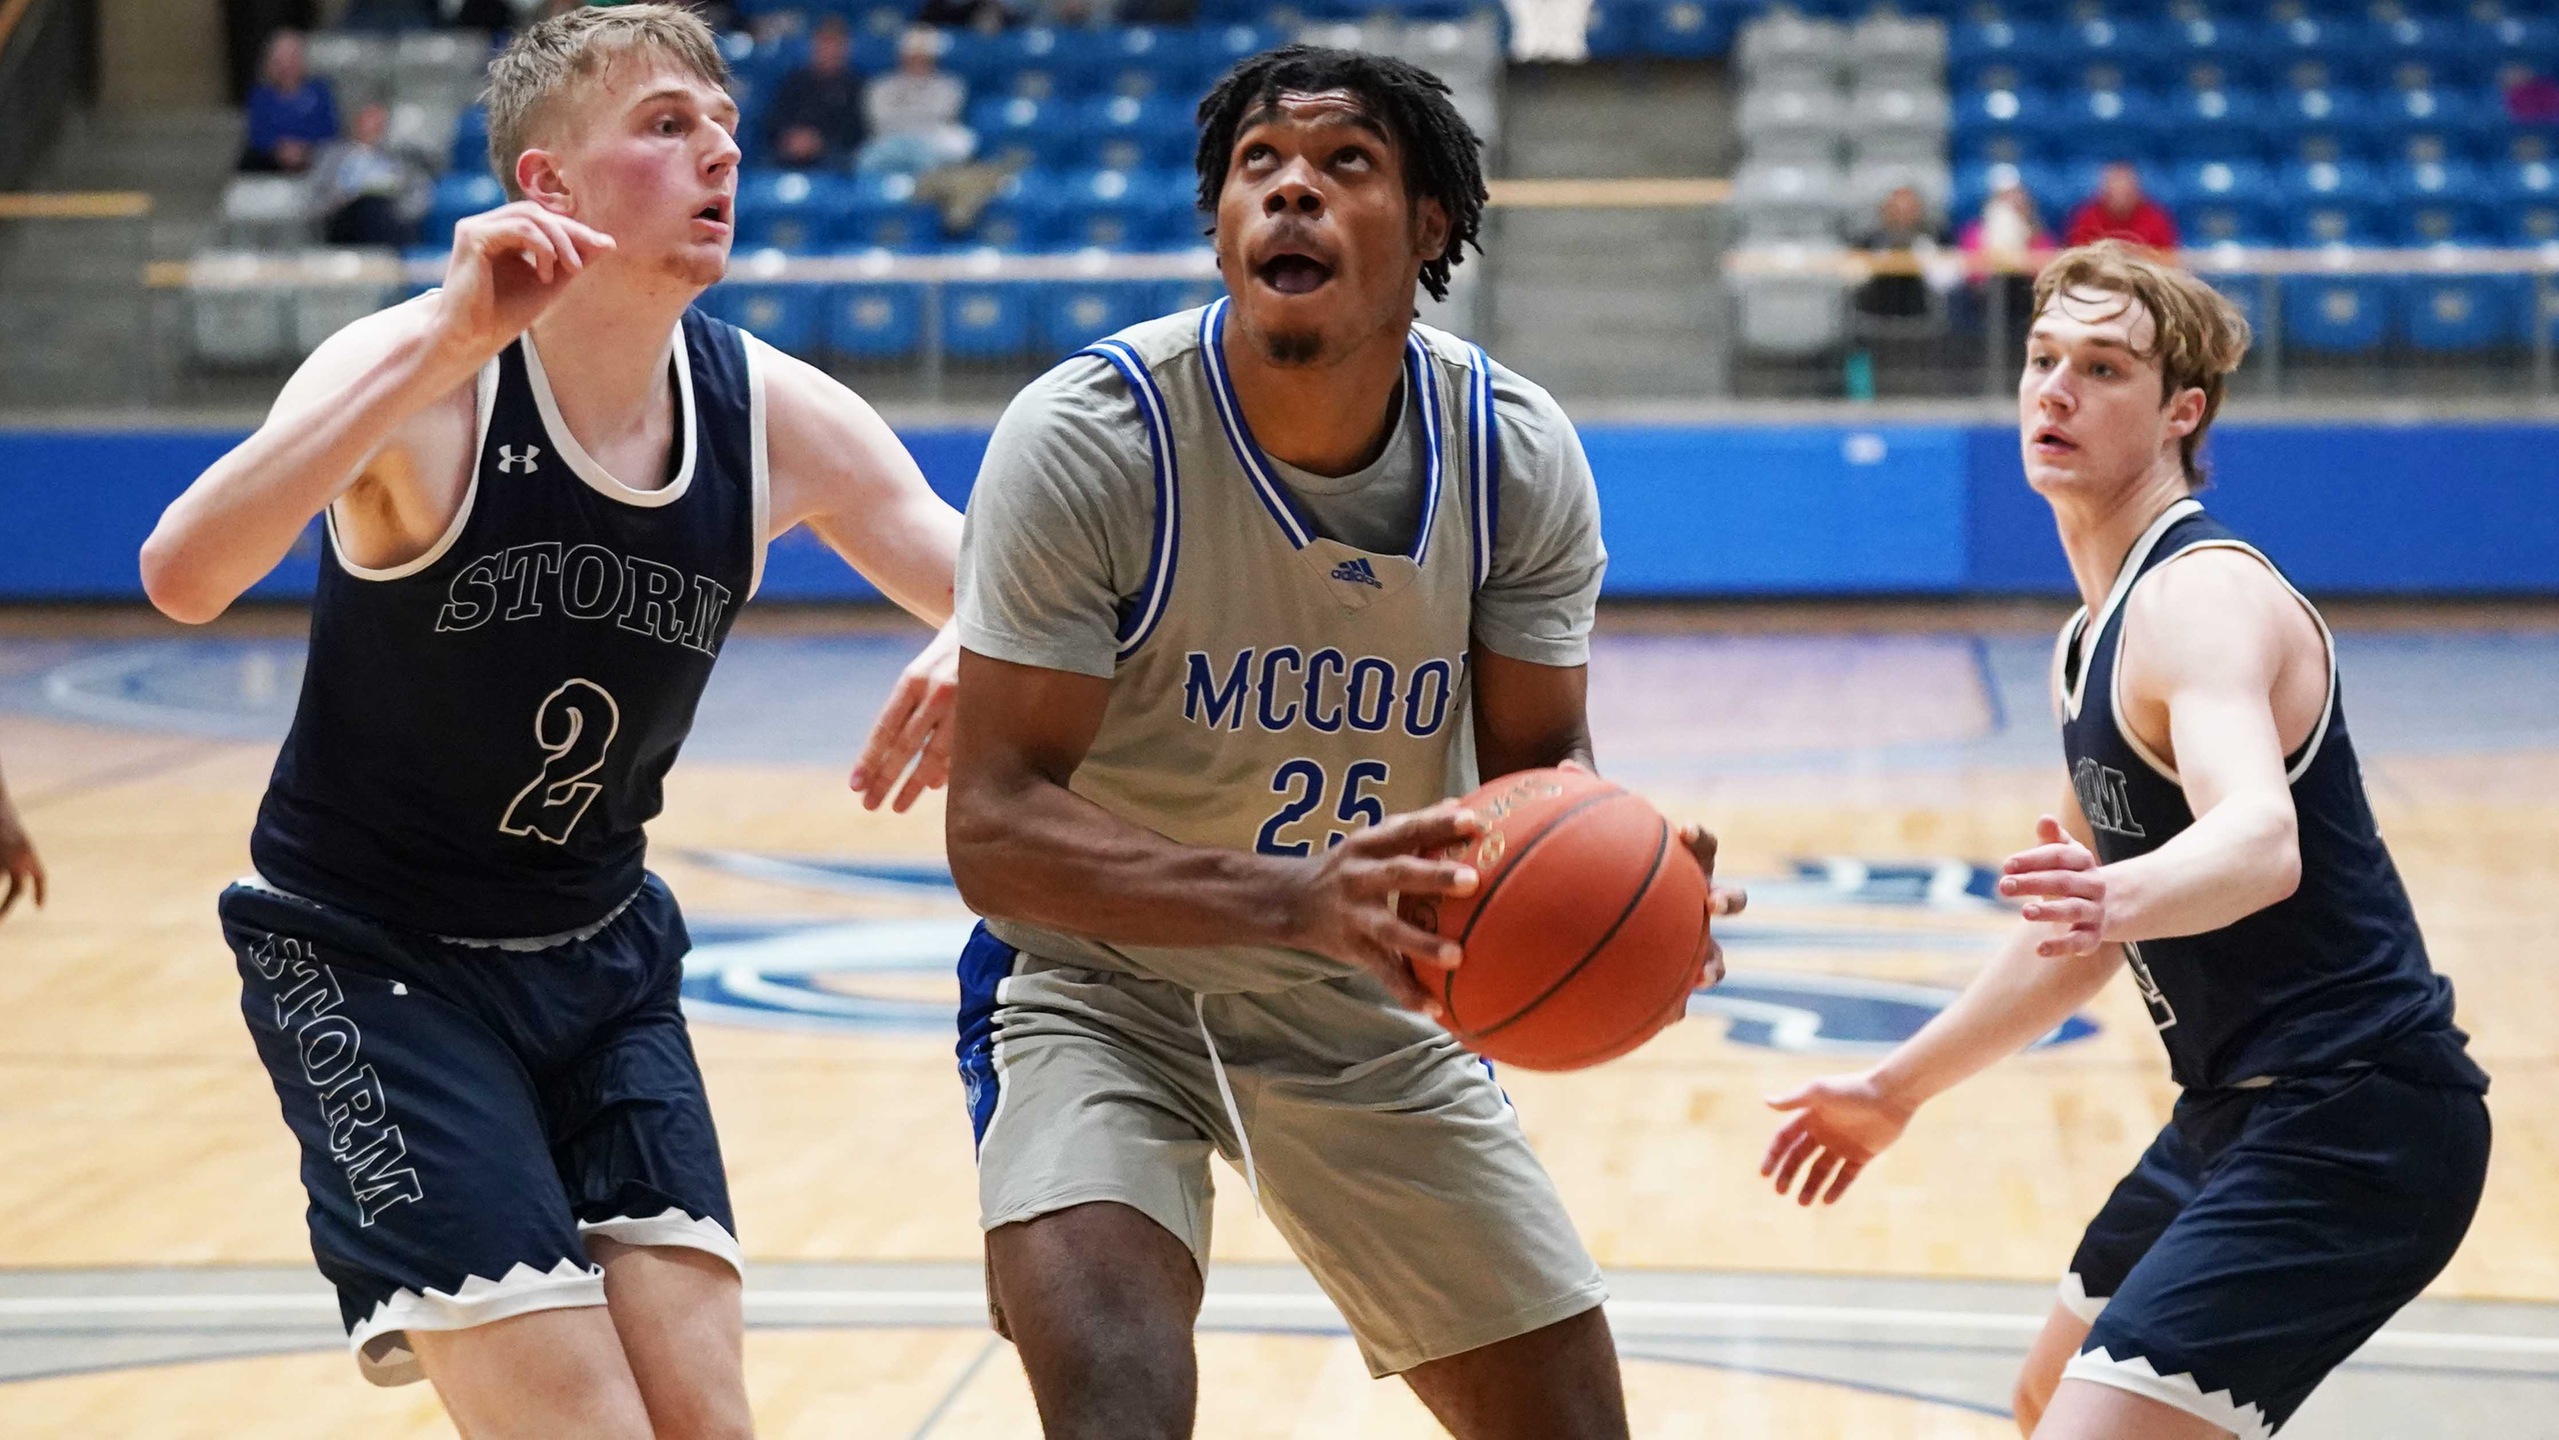 MCC's next home game is Friday against Lamar at 7:30 p.m.